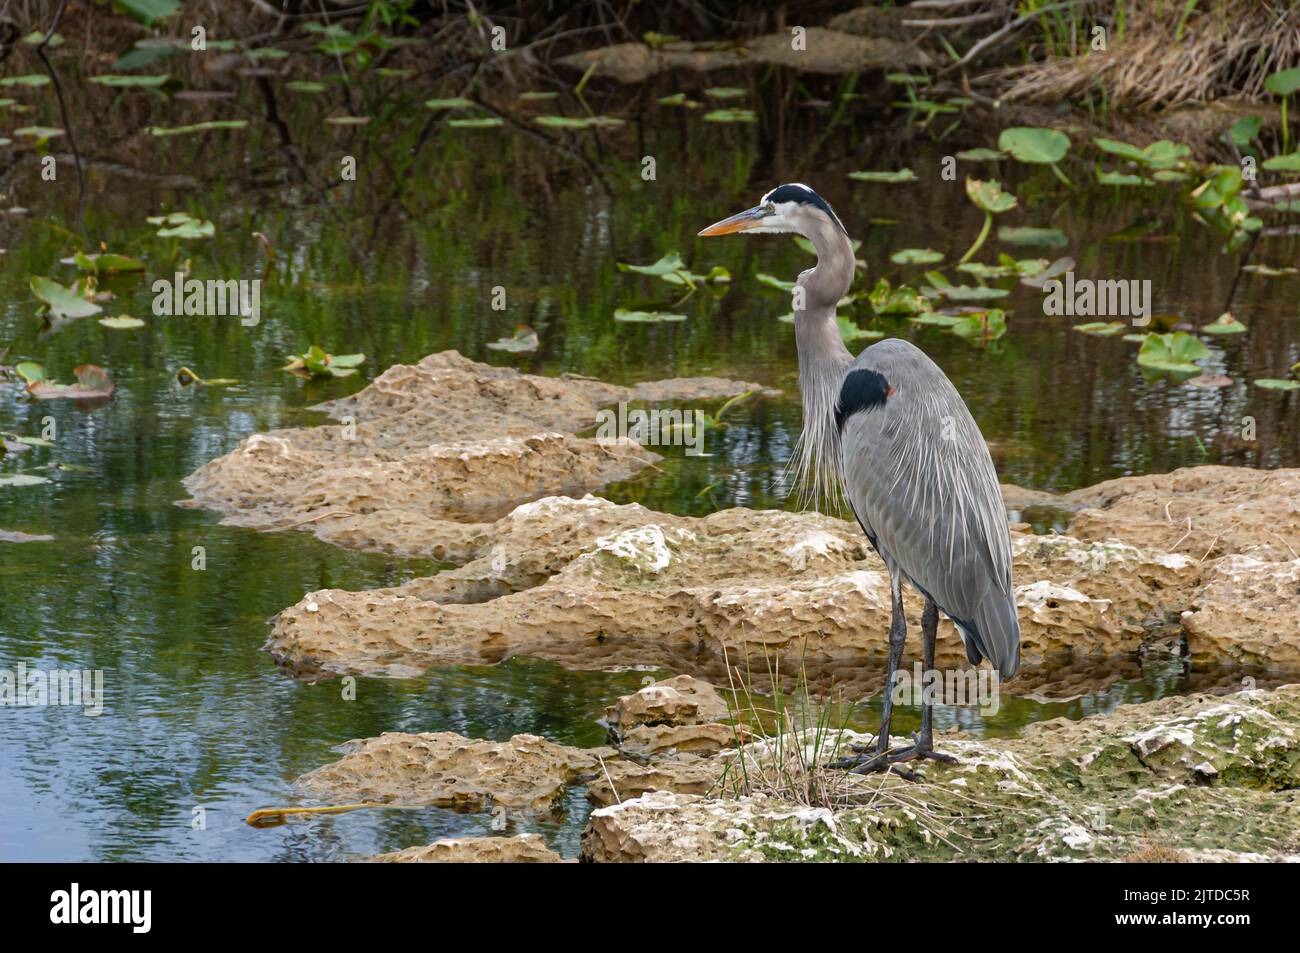 A Great Blue Heron along the Anhinga Trail in the Everglades National Park, Florida, USA. Stock Photo